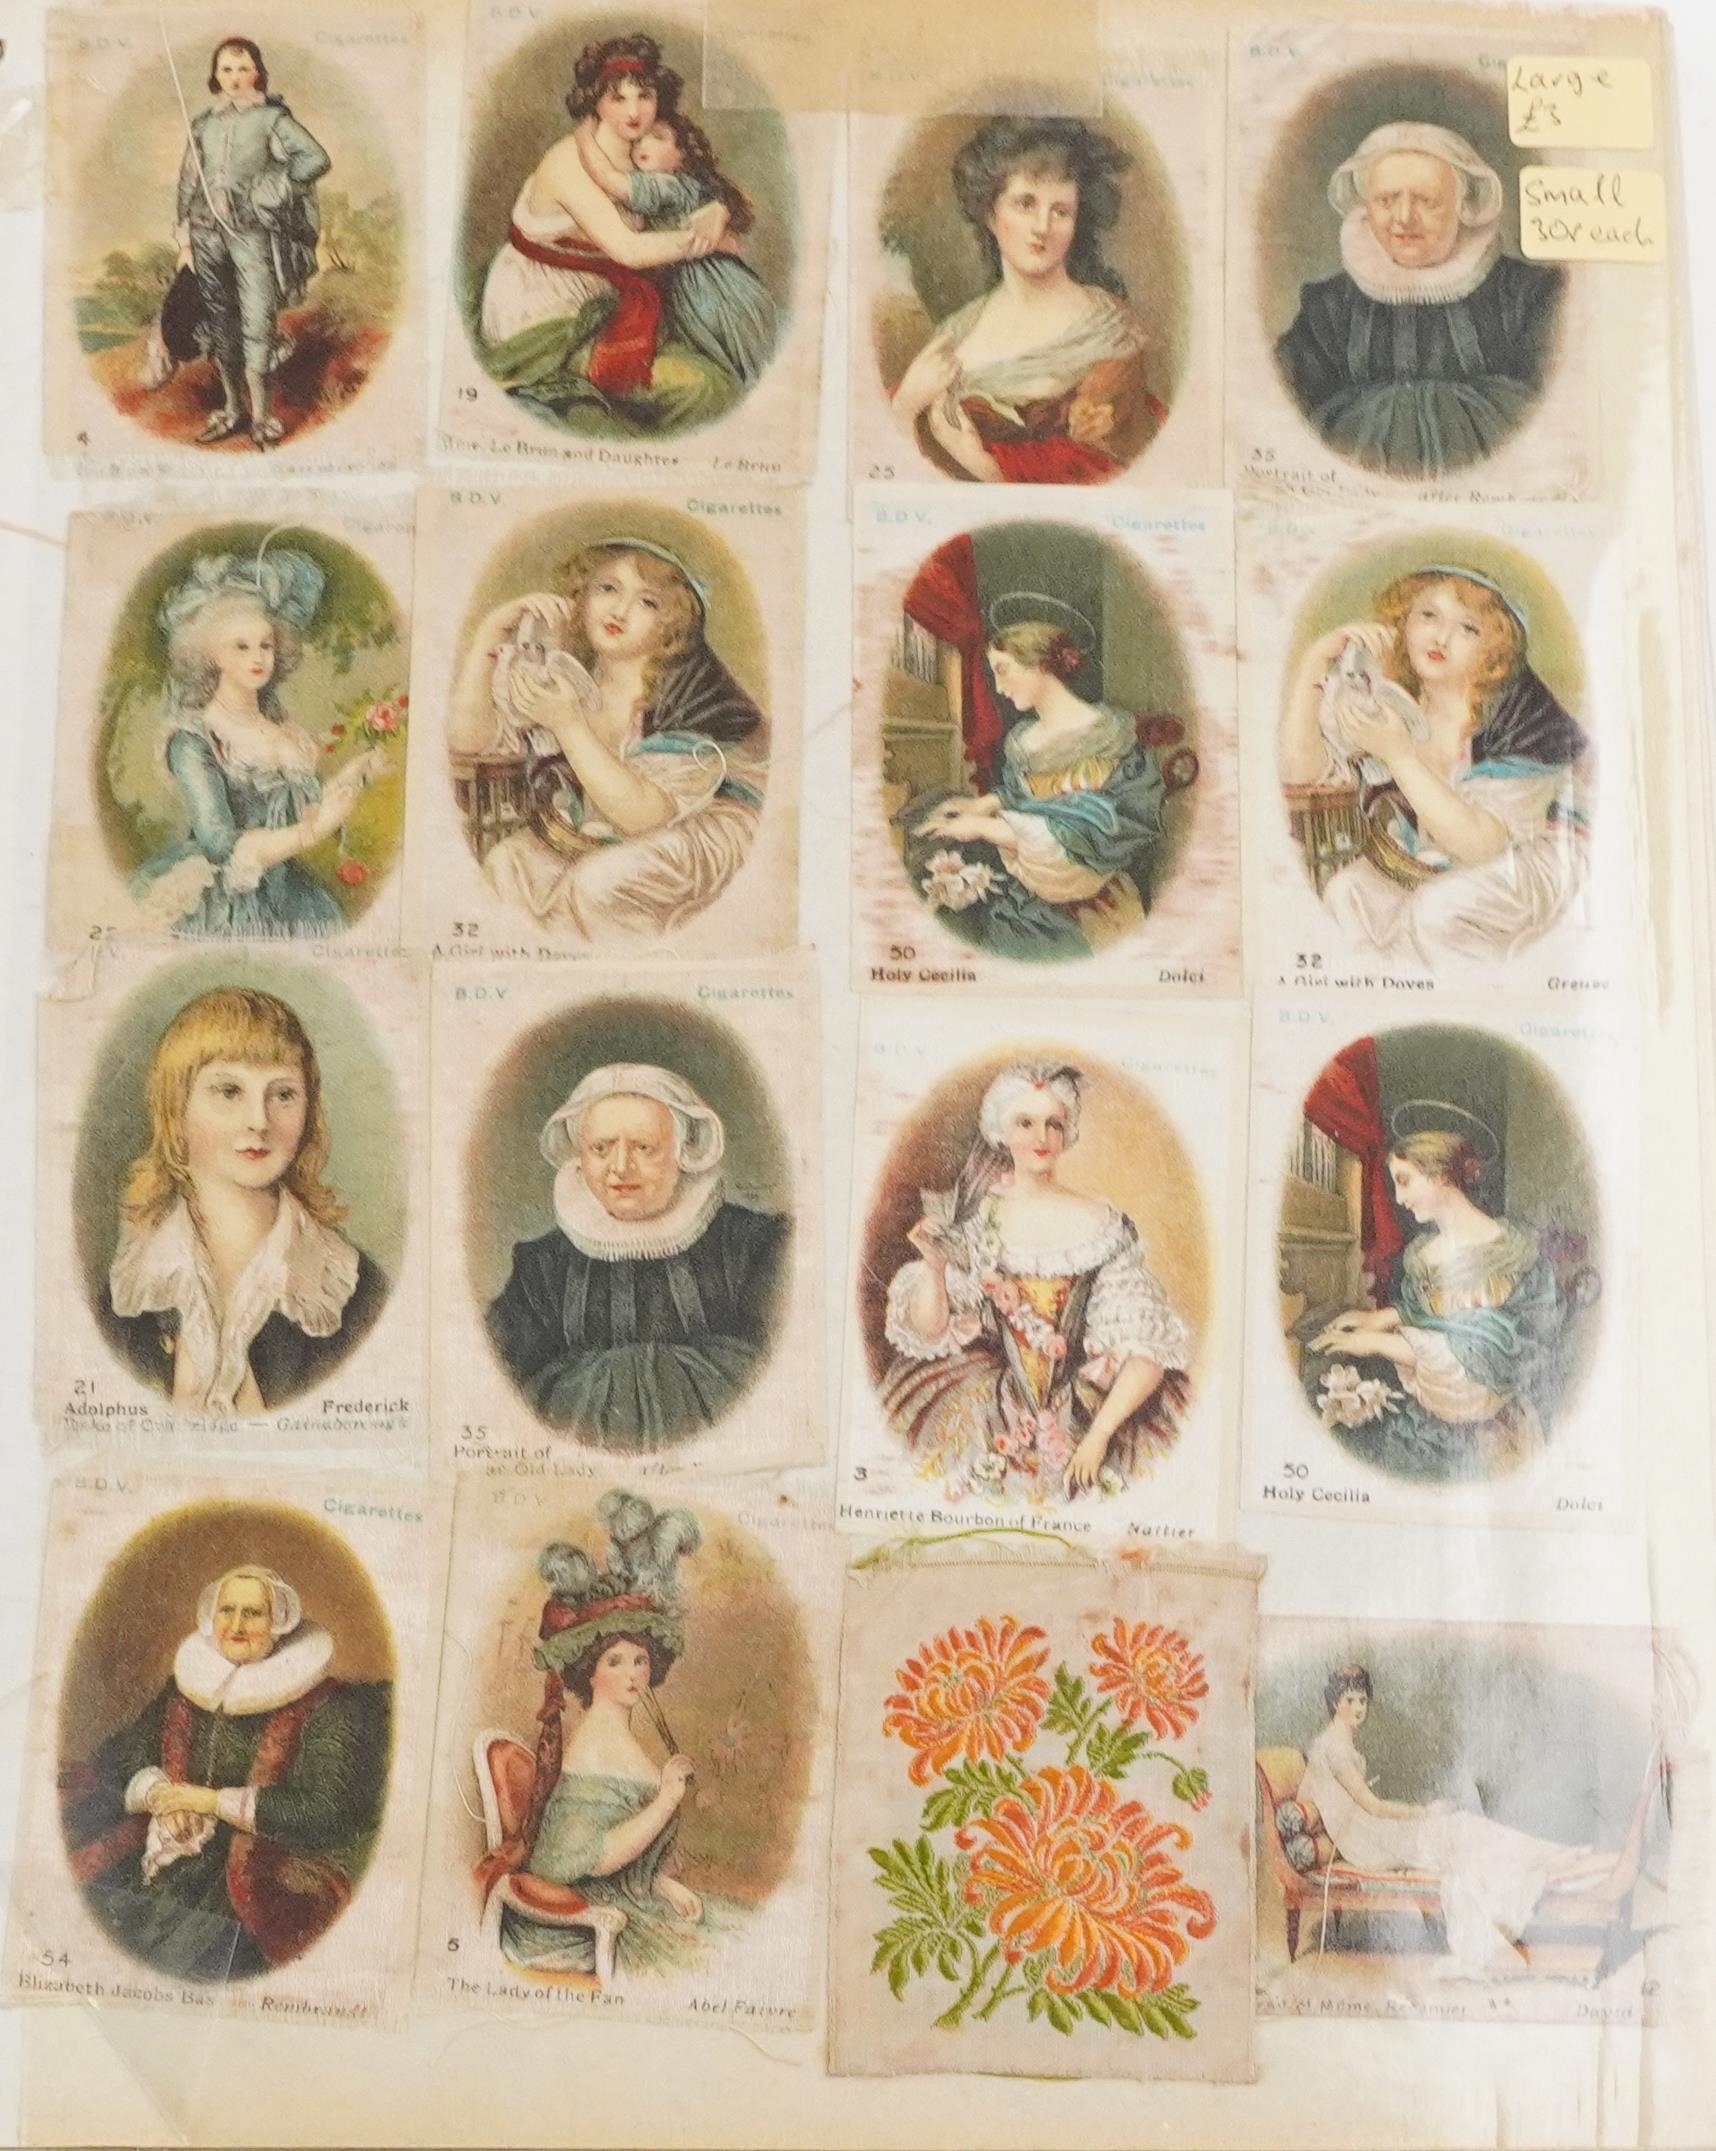 19th century and later ephemera including cigarette cards, tea cards, postcards and various books - Image 16 of 20